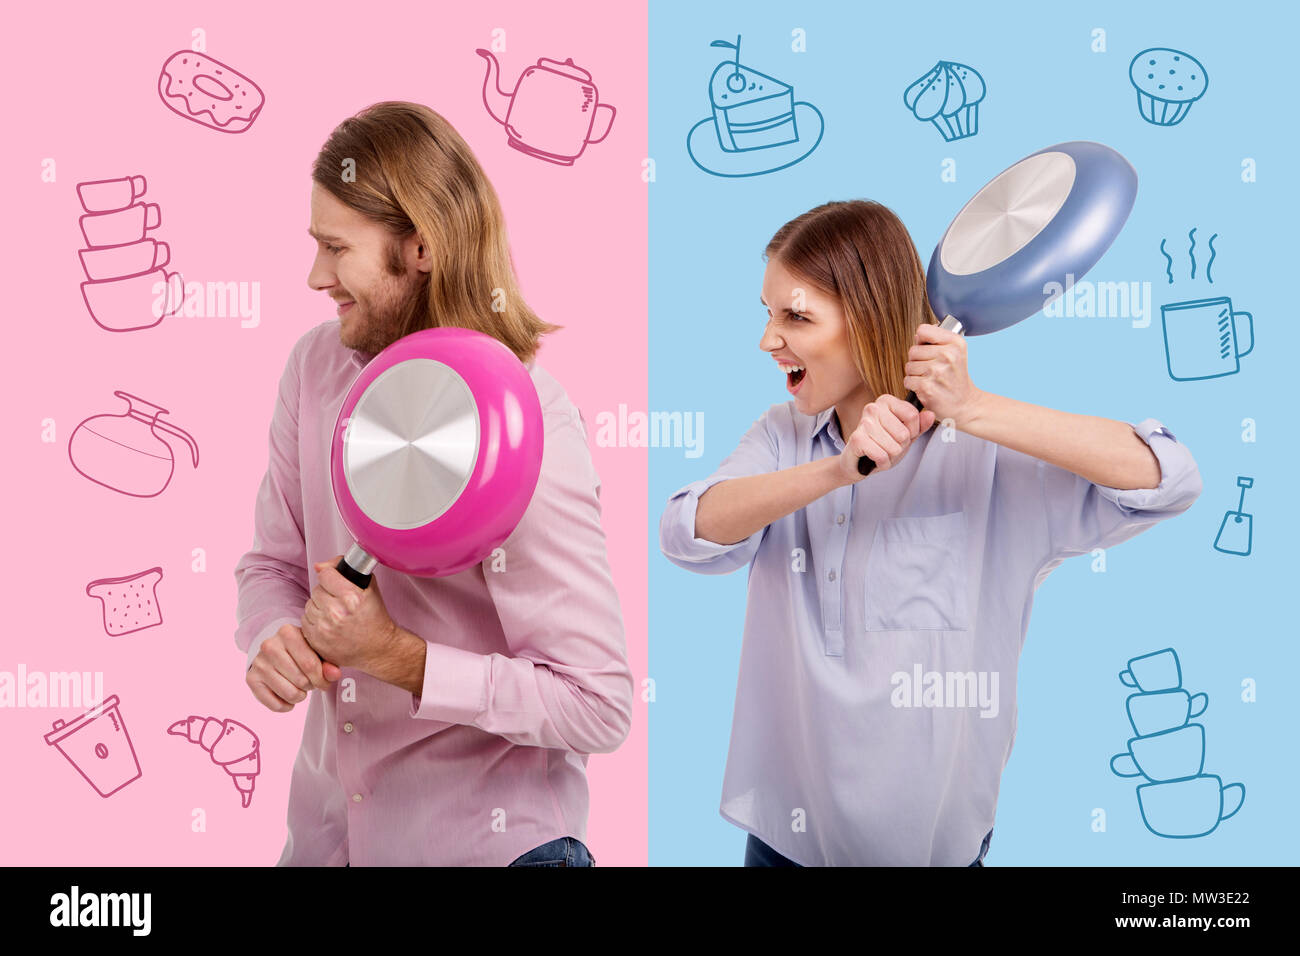 Angry Woman With Frying Pan Stock Photo, Picture and Royalty Free Image.  Image 55212507.